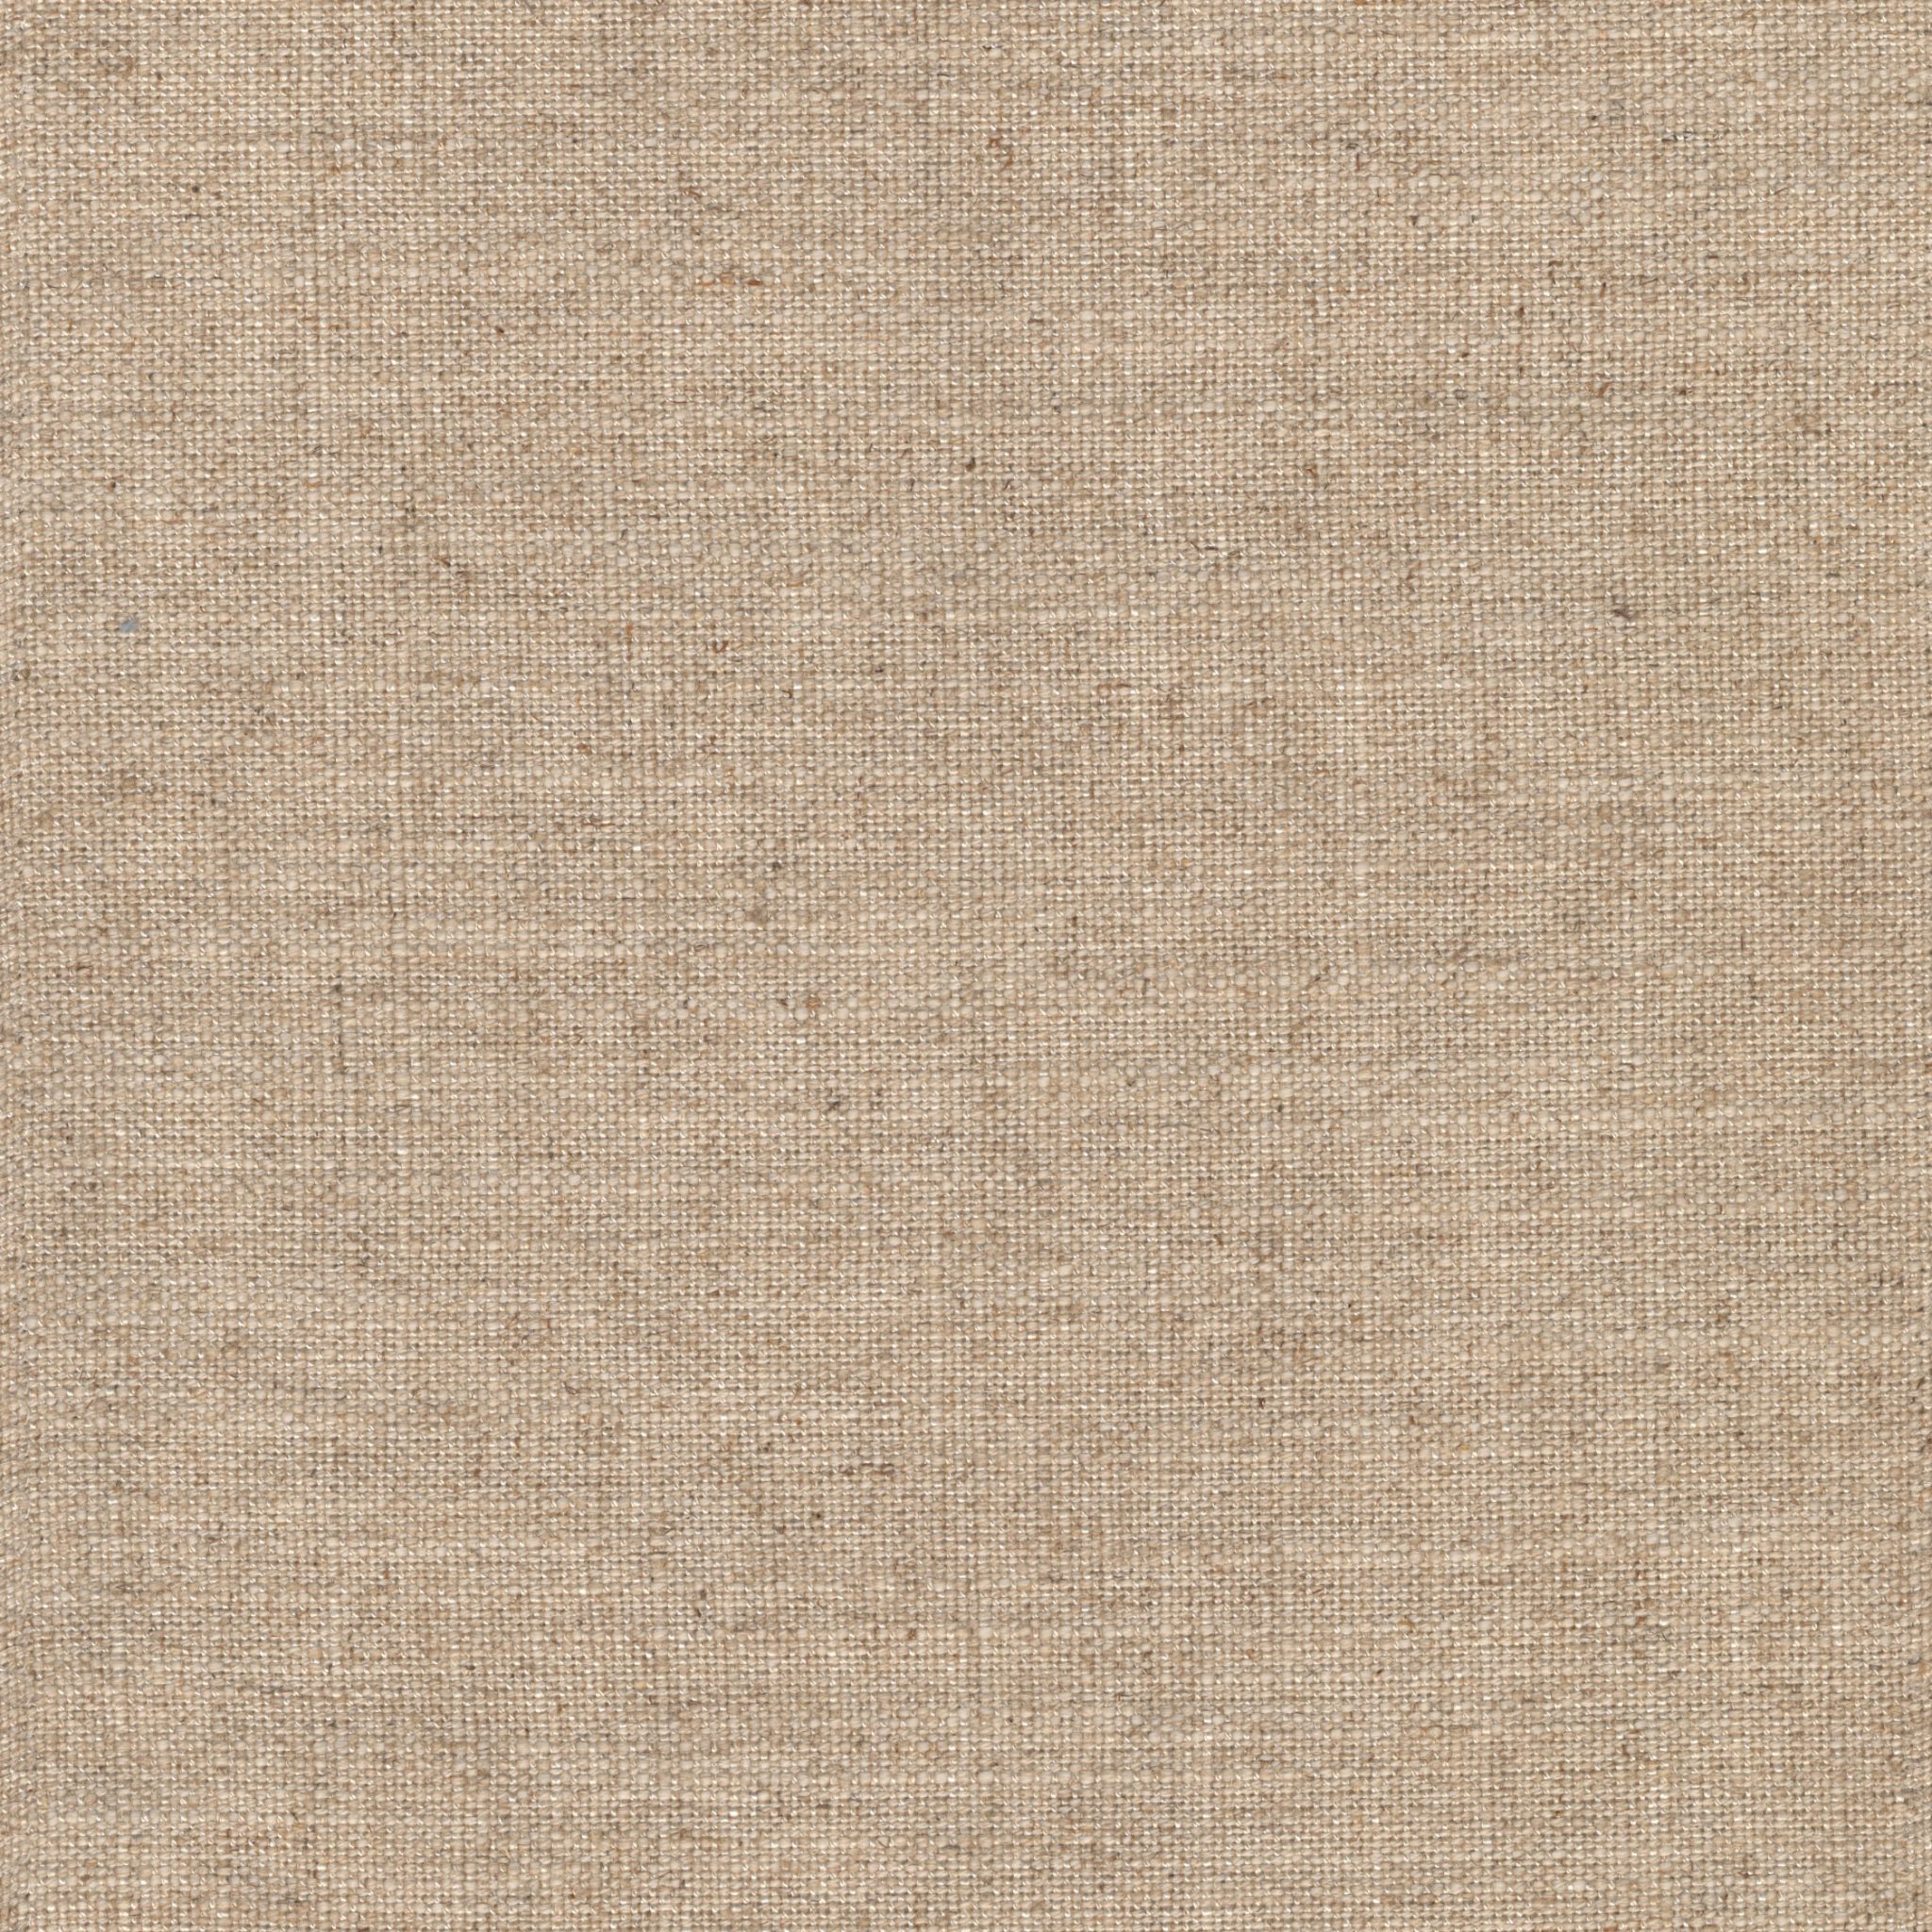 Windfield Natural - Fabric Swatch